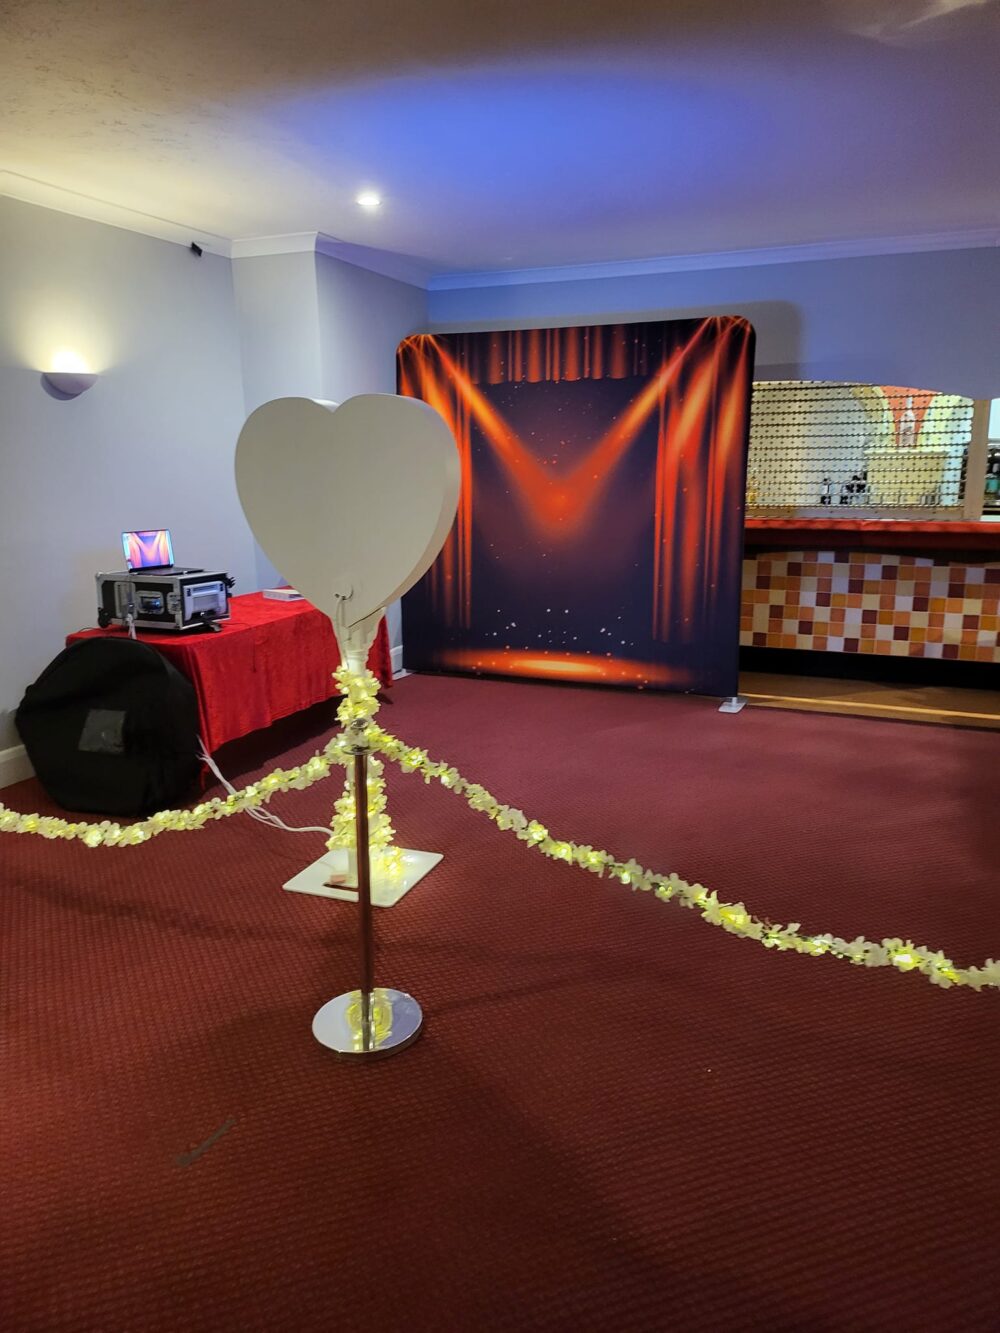 heart photo booth hire, photo booth hire near me, photo booth backdrop hire